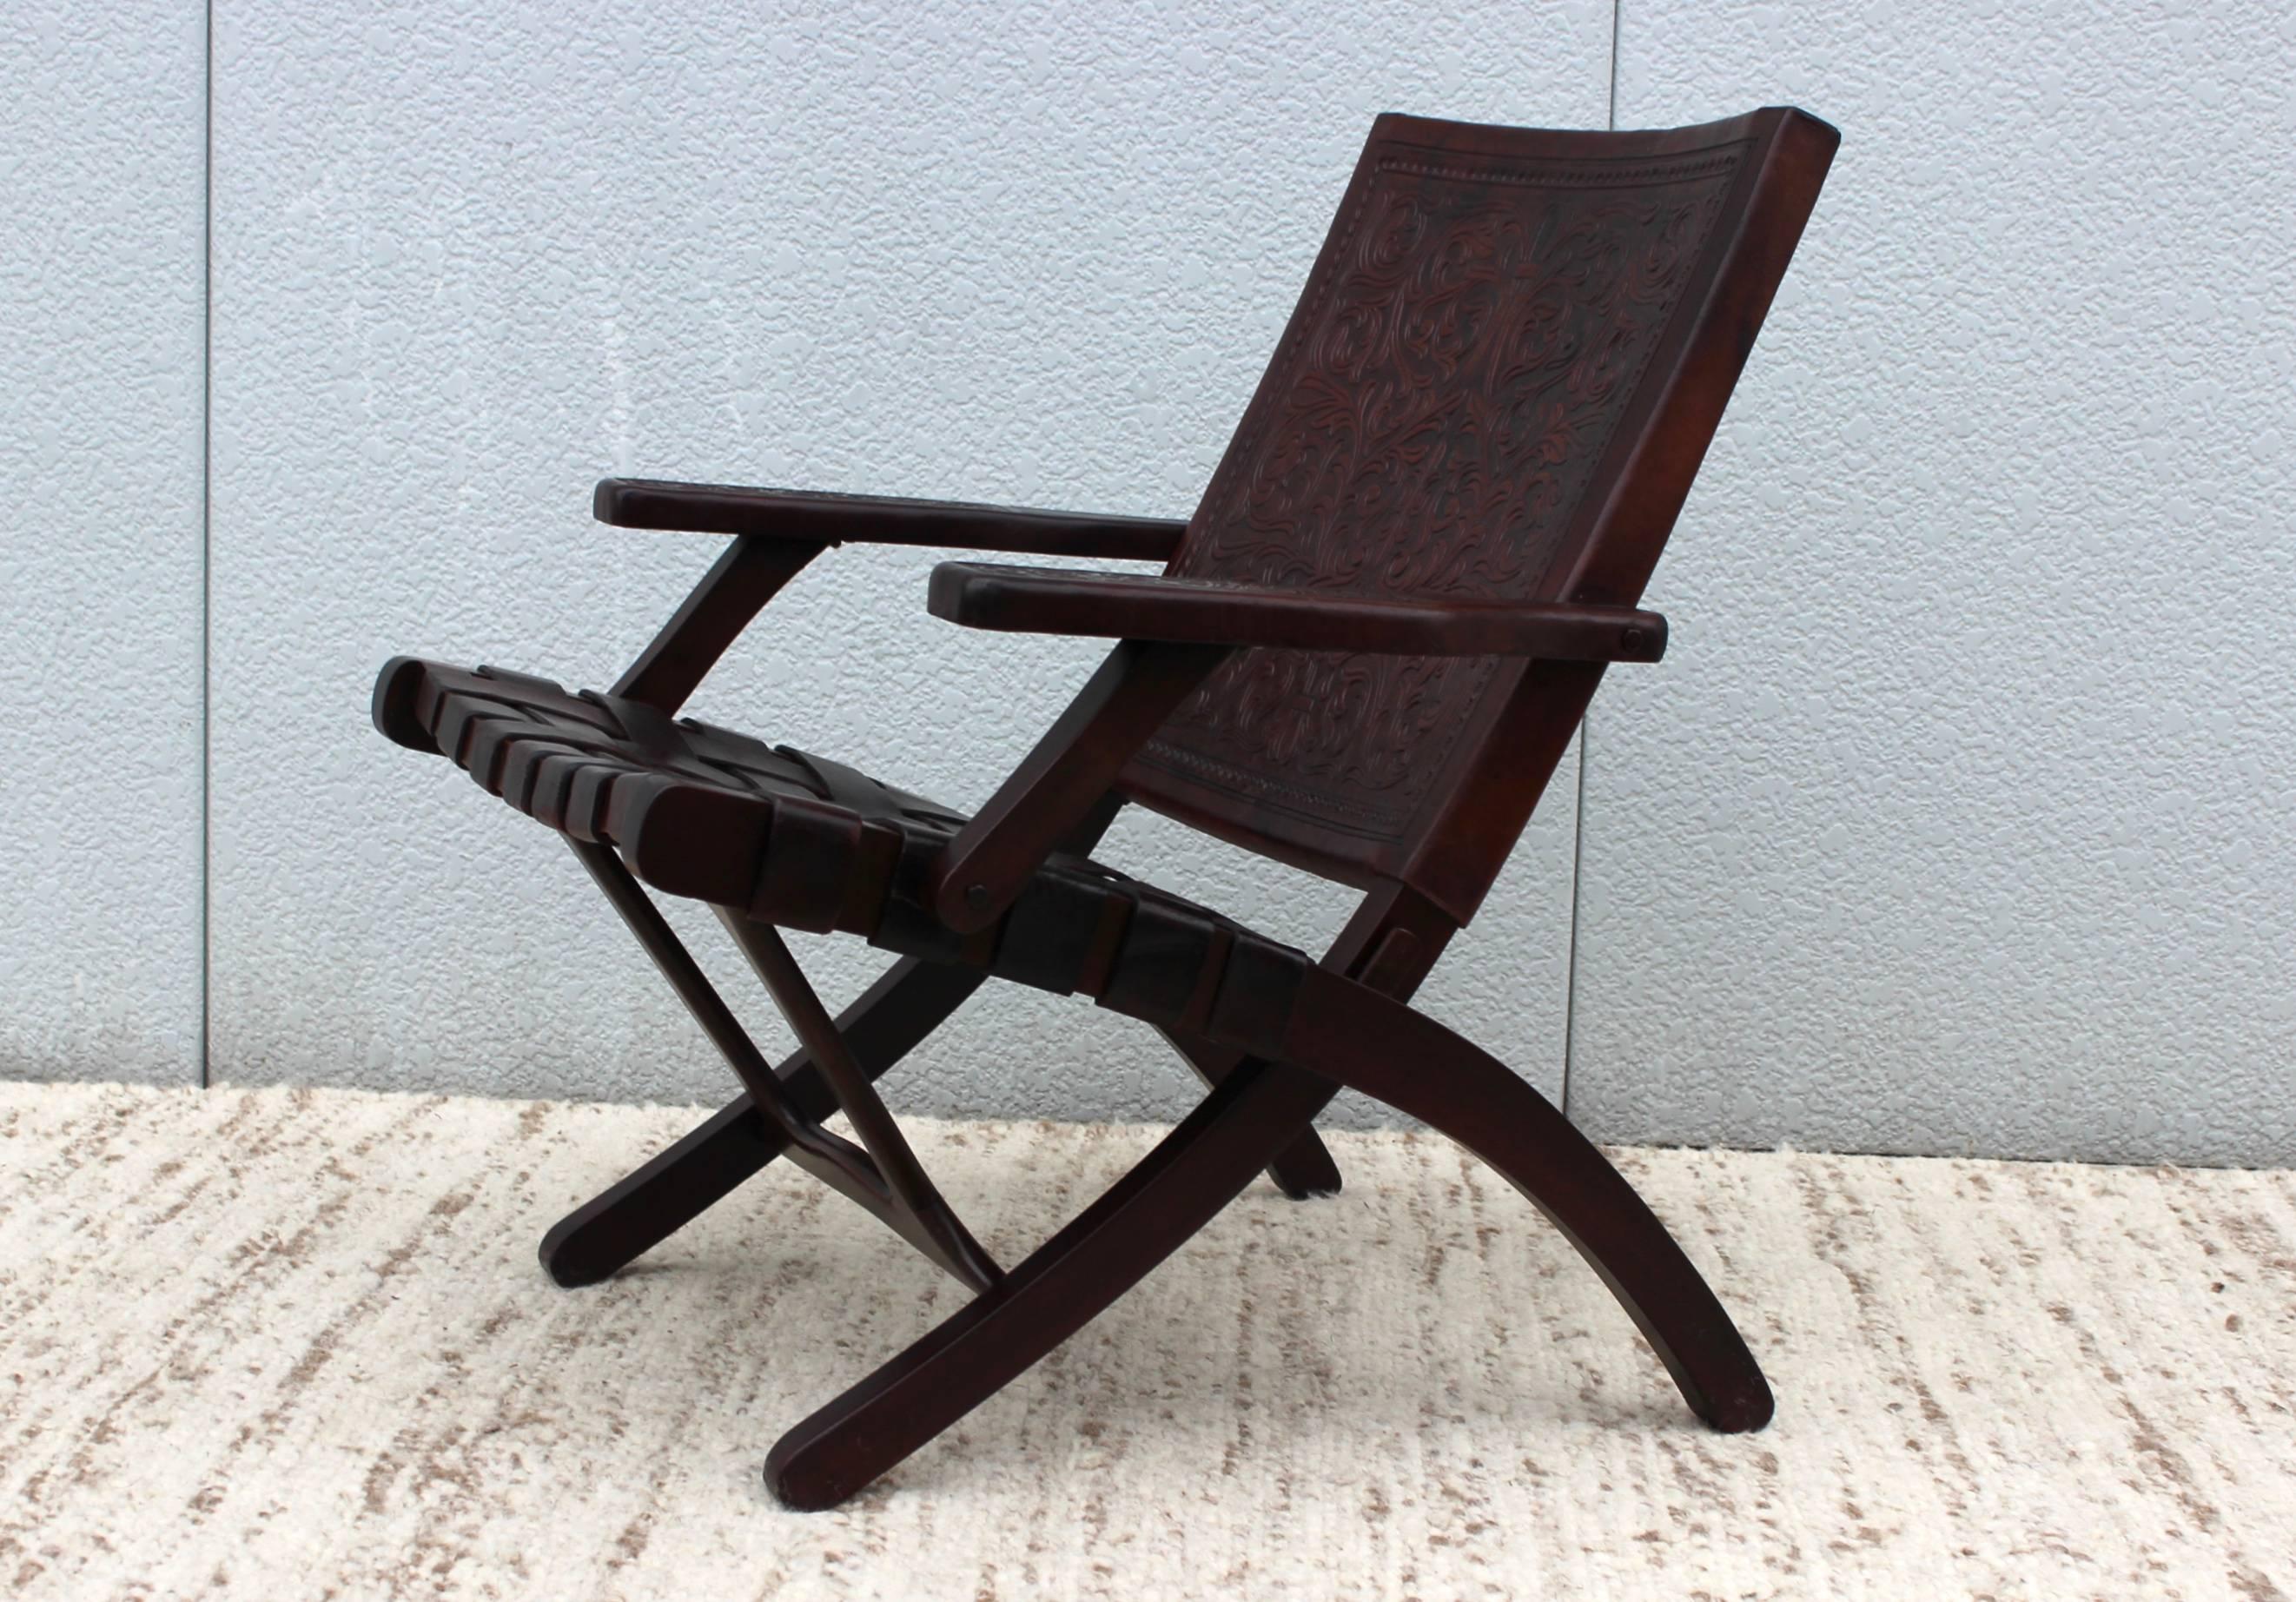 1940s distressed leather Spanish folding lounge chair, in vintage condition with some wear and patina due to age and use.